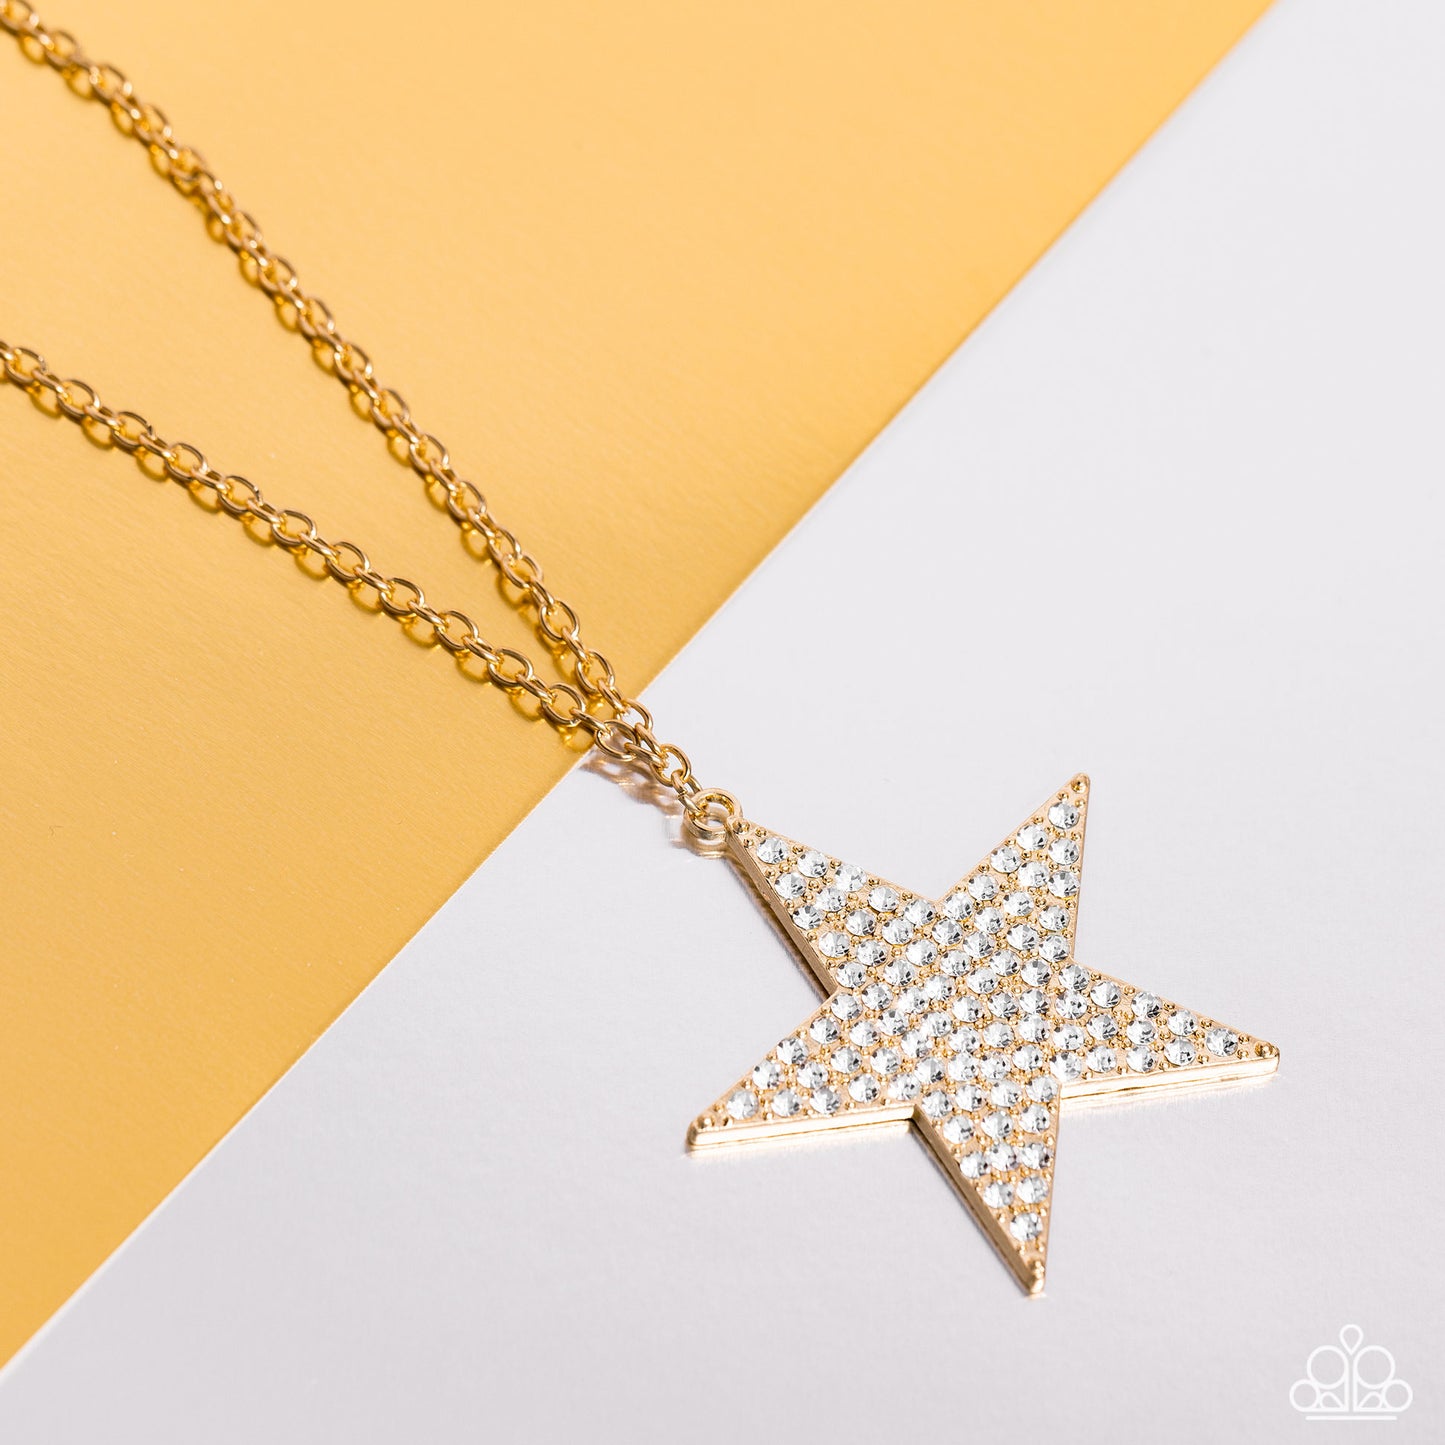 Paparazzi Accessories - Rock Star Sparkle Gold Necklaces a front of an oversized gold star is encrusted in blinding white rhinestones, resulting in a stellar pendant at the bottom of a lengthened gold chain. Features an adjustable clasp closure.  Sold as one individual necklace. Includes one pair of matching earrings.